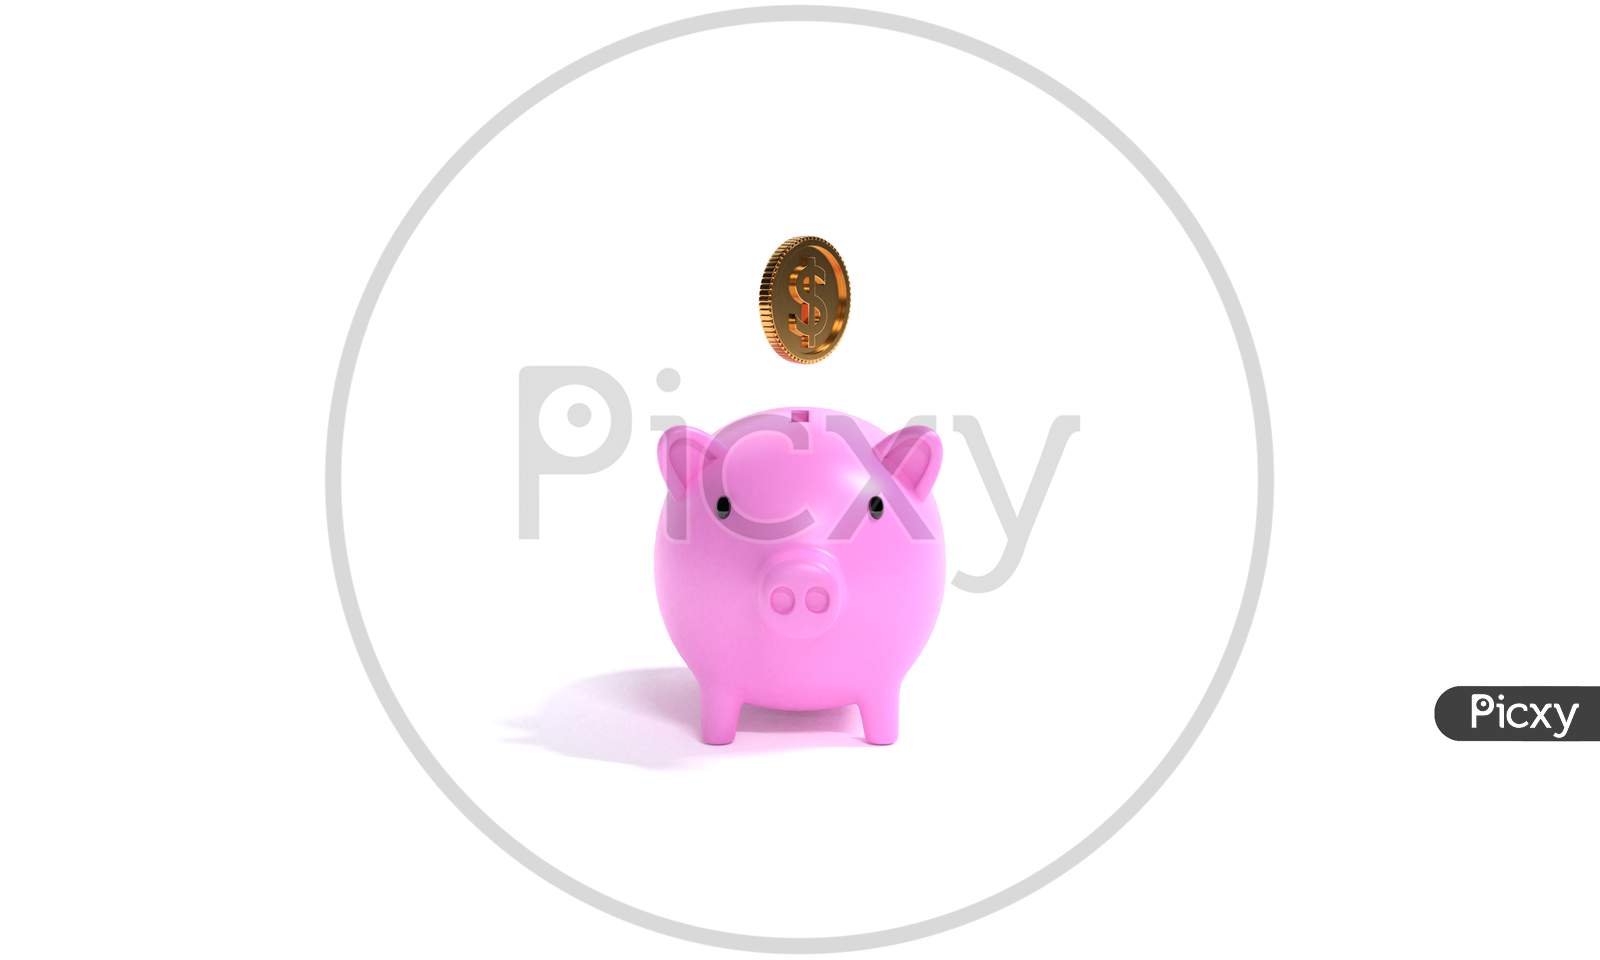 3D Render Illustration Of Isolated Piggy Bank And Floating Coins, Concept Of Saving